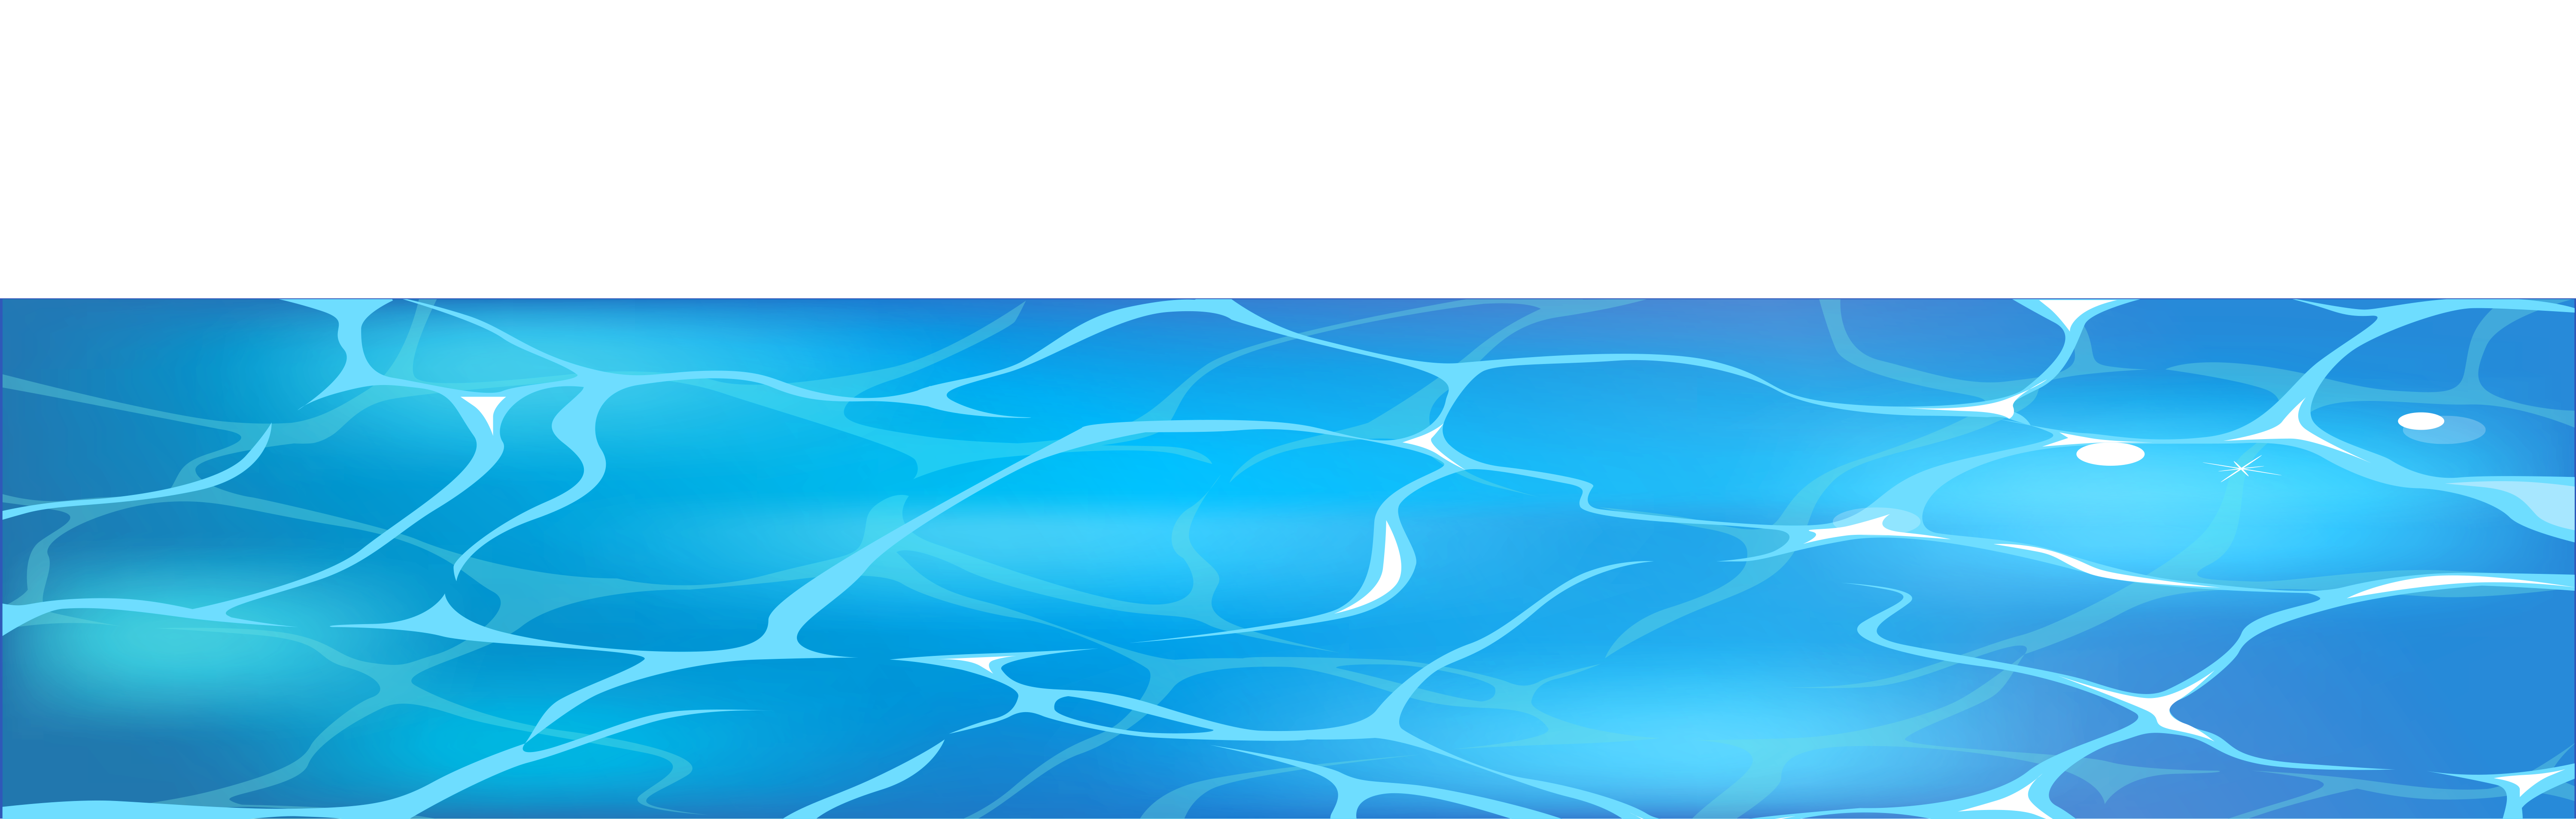 Seawater PNG Clipart.